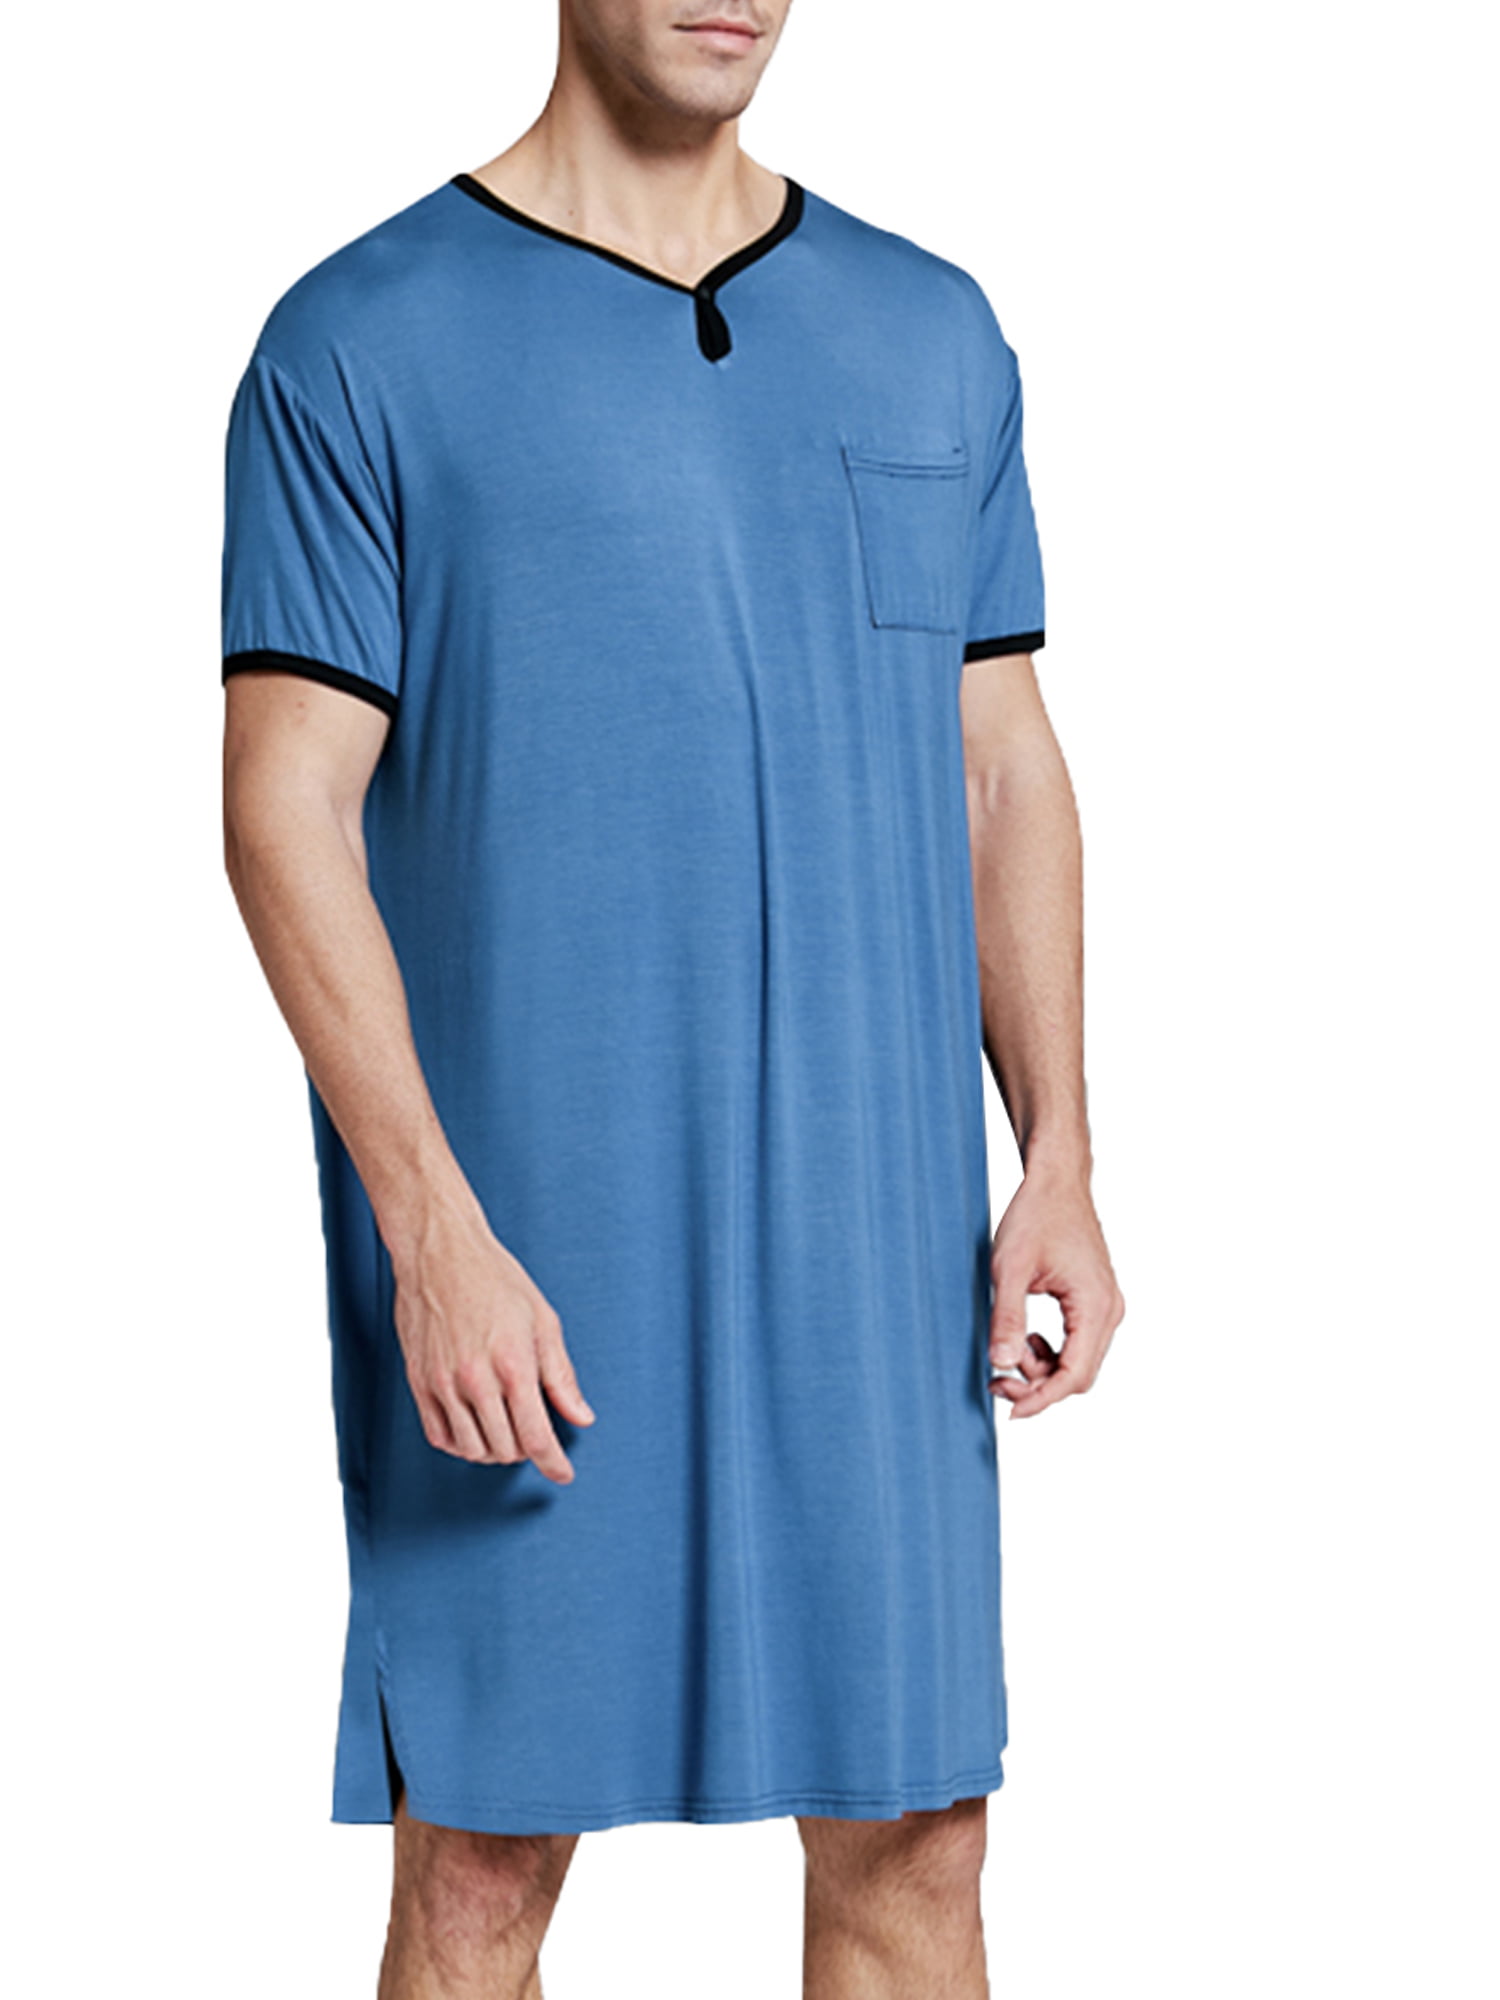 Luethbiezx Men Nightgown V Neck Short Sleeved Loose Pajamas Suitable For Home Wear 54e424e4 36f9 4401 A9a5 4052b7380b60.1cfbb2825ae45d8a646ed80bf55f9874 